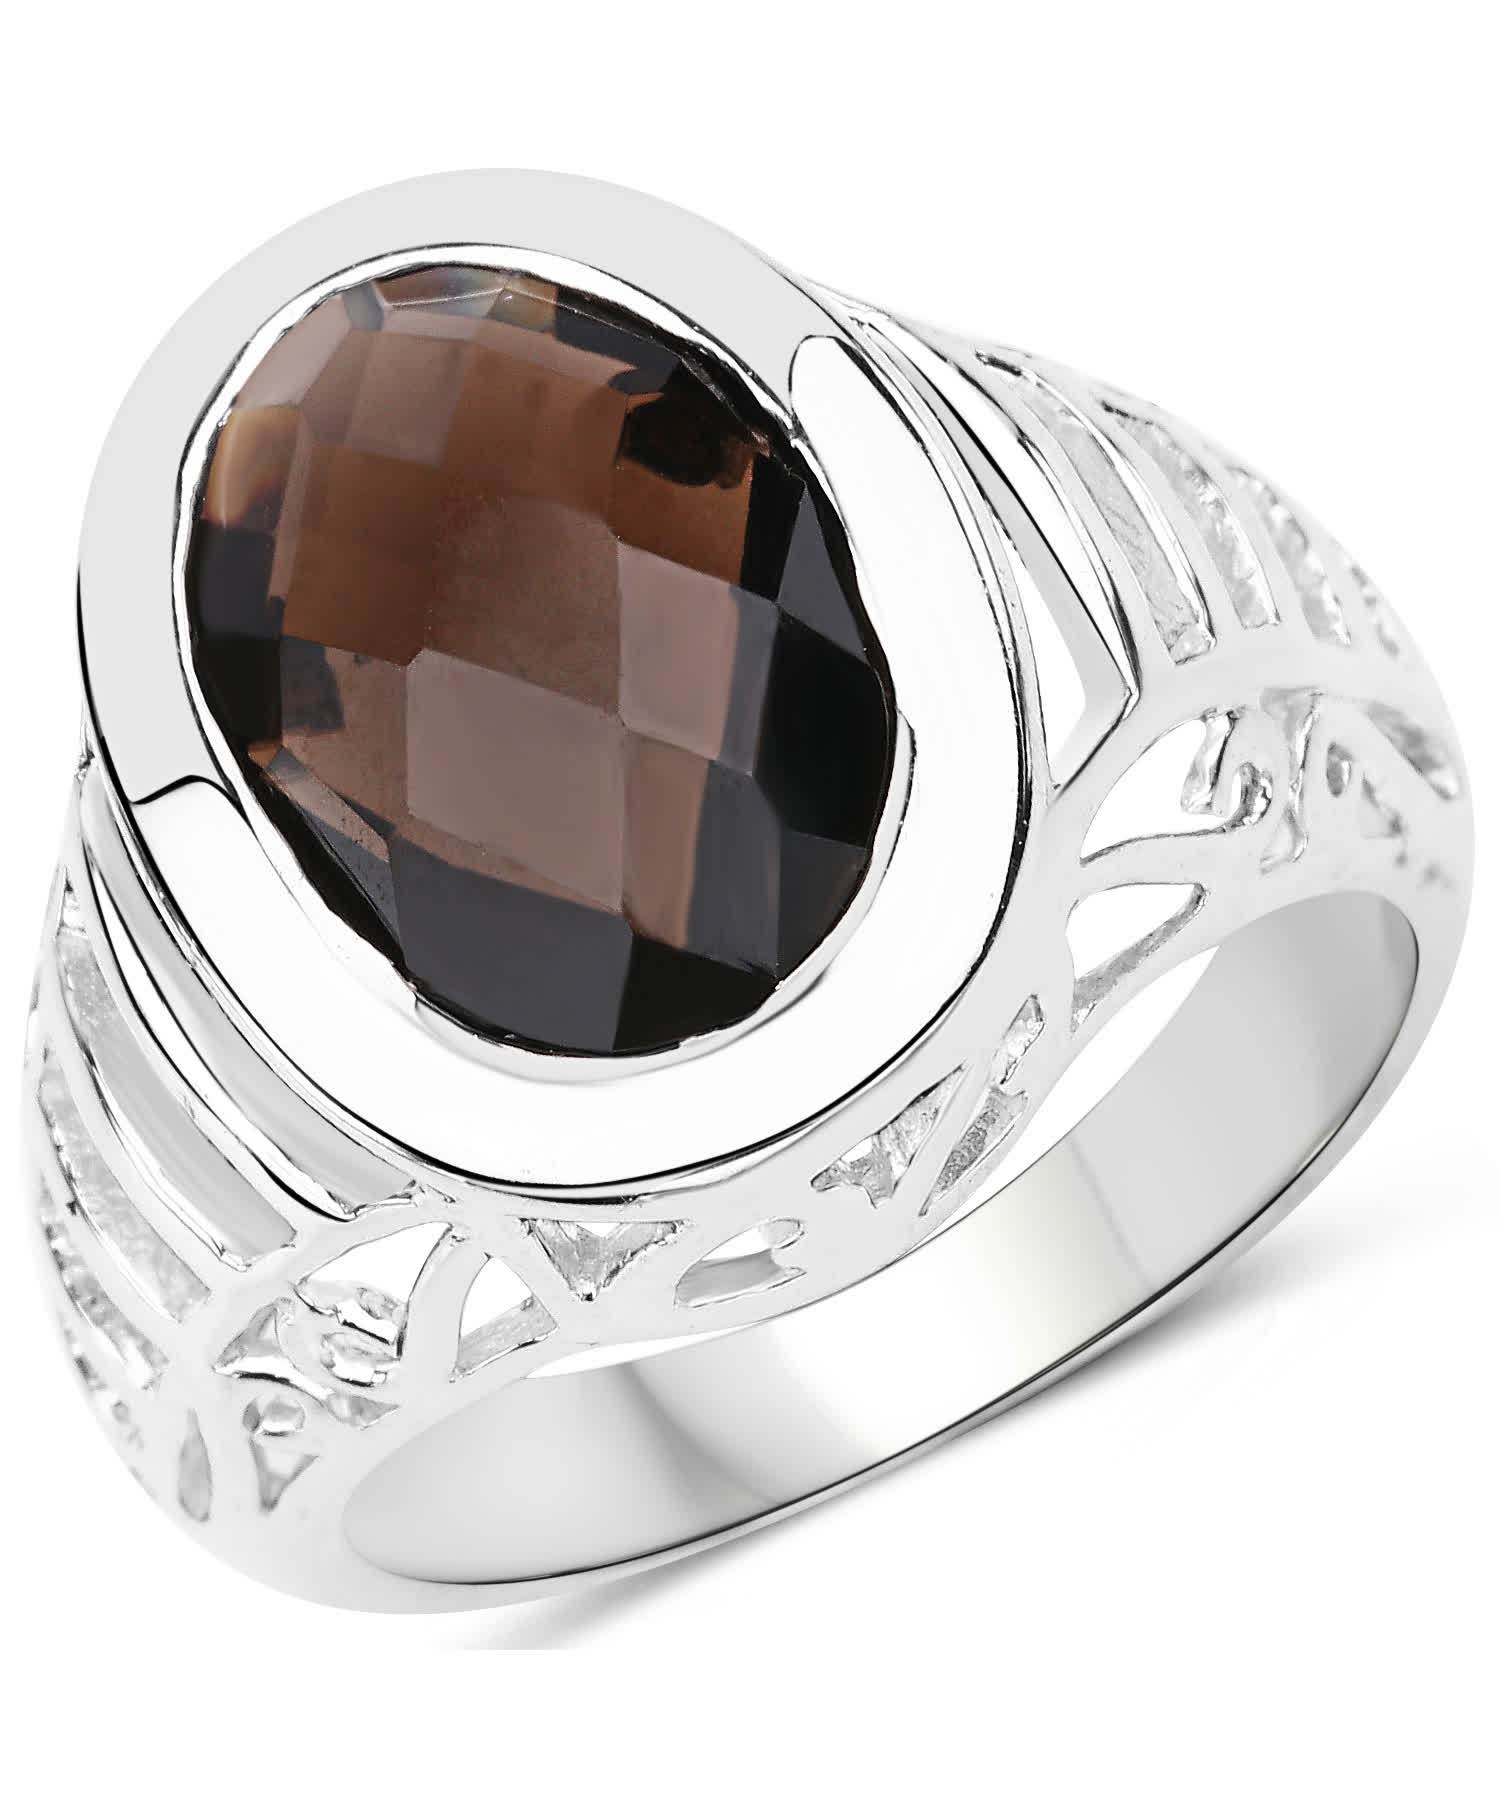 5.46ctw Natural Smoky Quartz Rhodium Plated 925 Sterling Silver Ring View 1